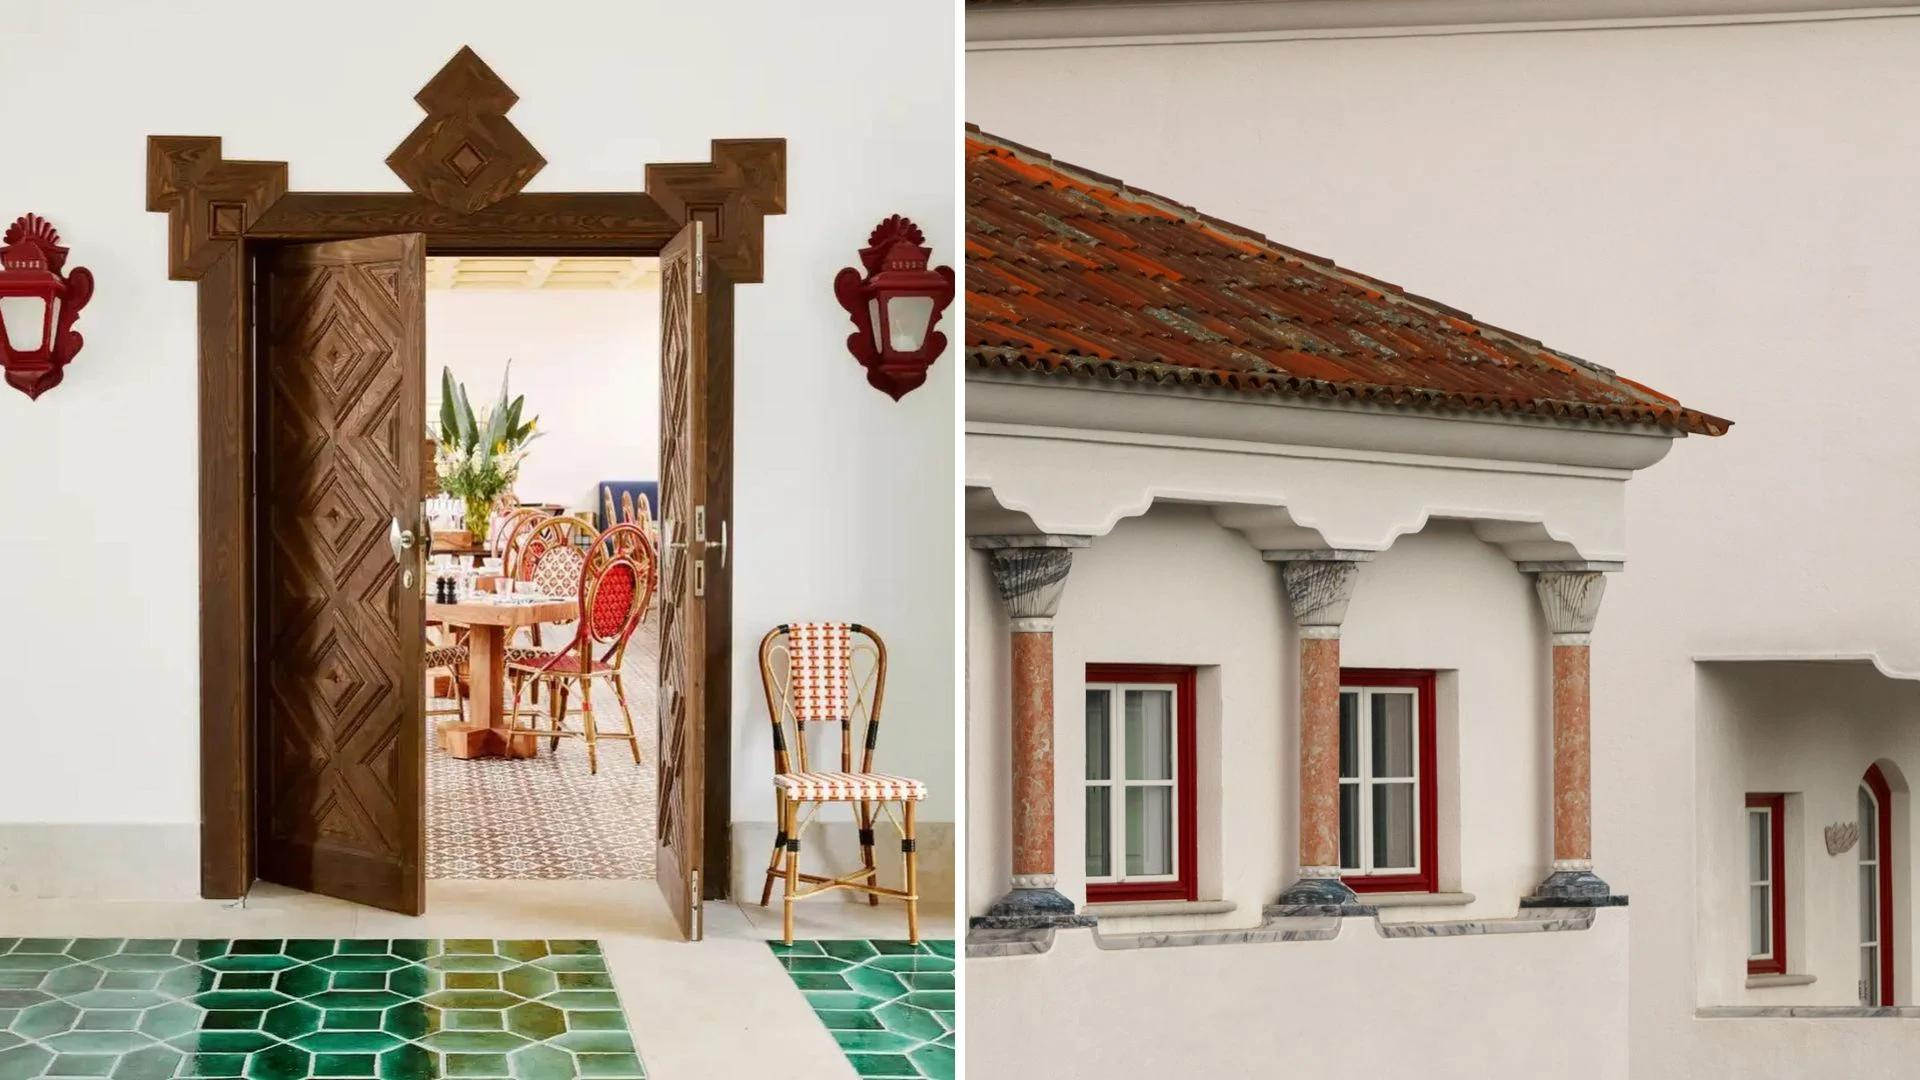 The best hotels in Portugal according to Condé Nast Traveller (1)